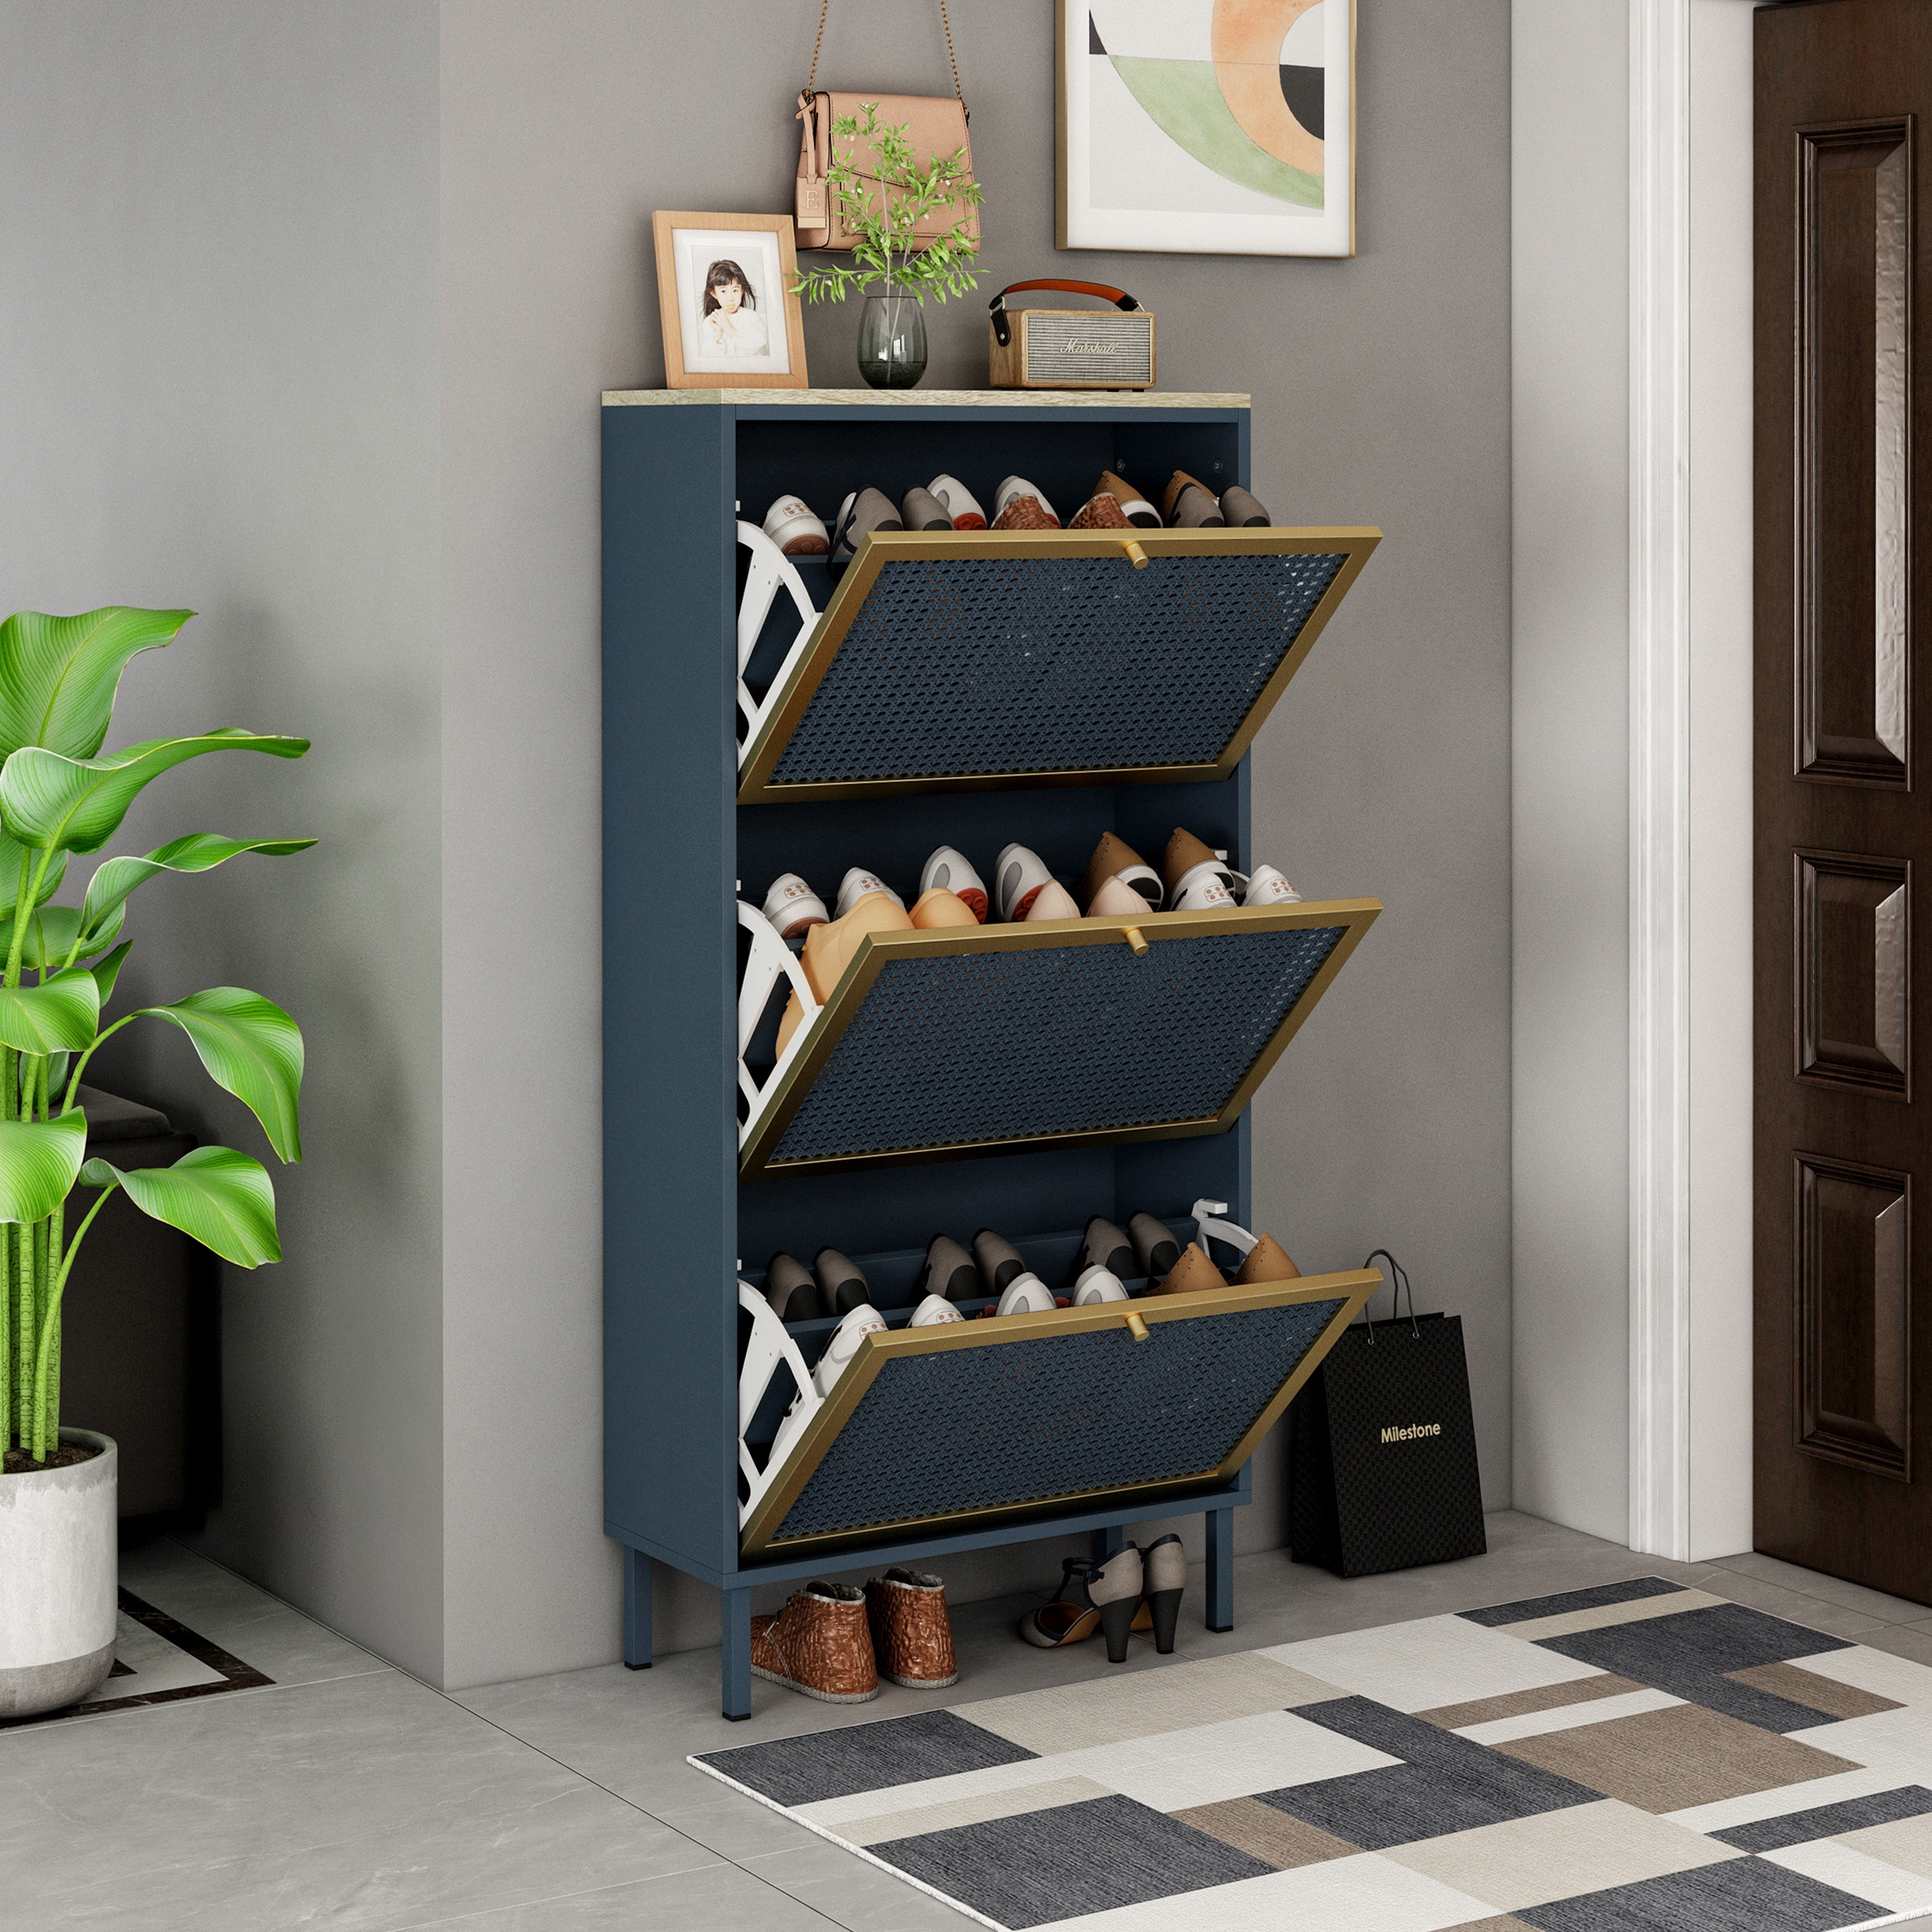 https://ak1.ostkcdn.com/images/products/is/images/direct/d0513bd9e962a119840d46e7c22a4febecdcb889/Eureka-Mid-century-Entryway-Shoe-Cabinet%2C-18-Pair-Shoe-Rack-Storage-Organizer-with-Flip-Drawers-for-Entryway%2C-Hallway%2C-Bedroom.jpg